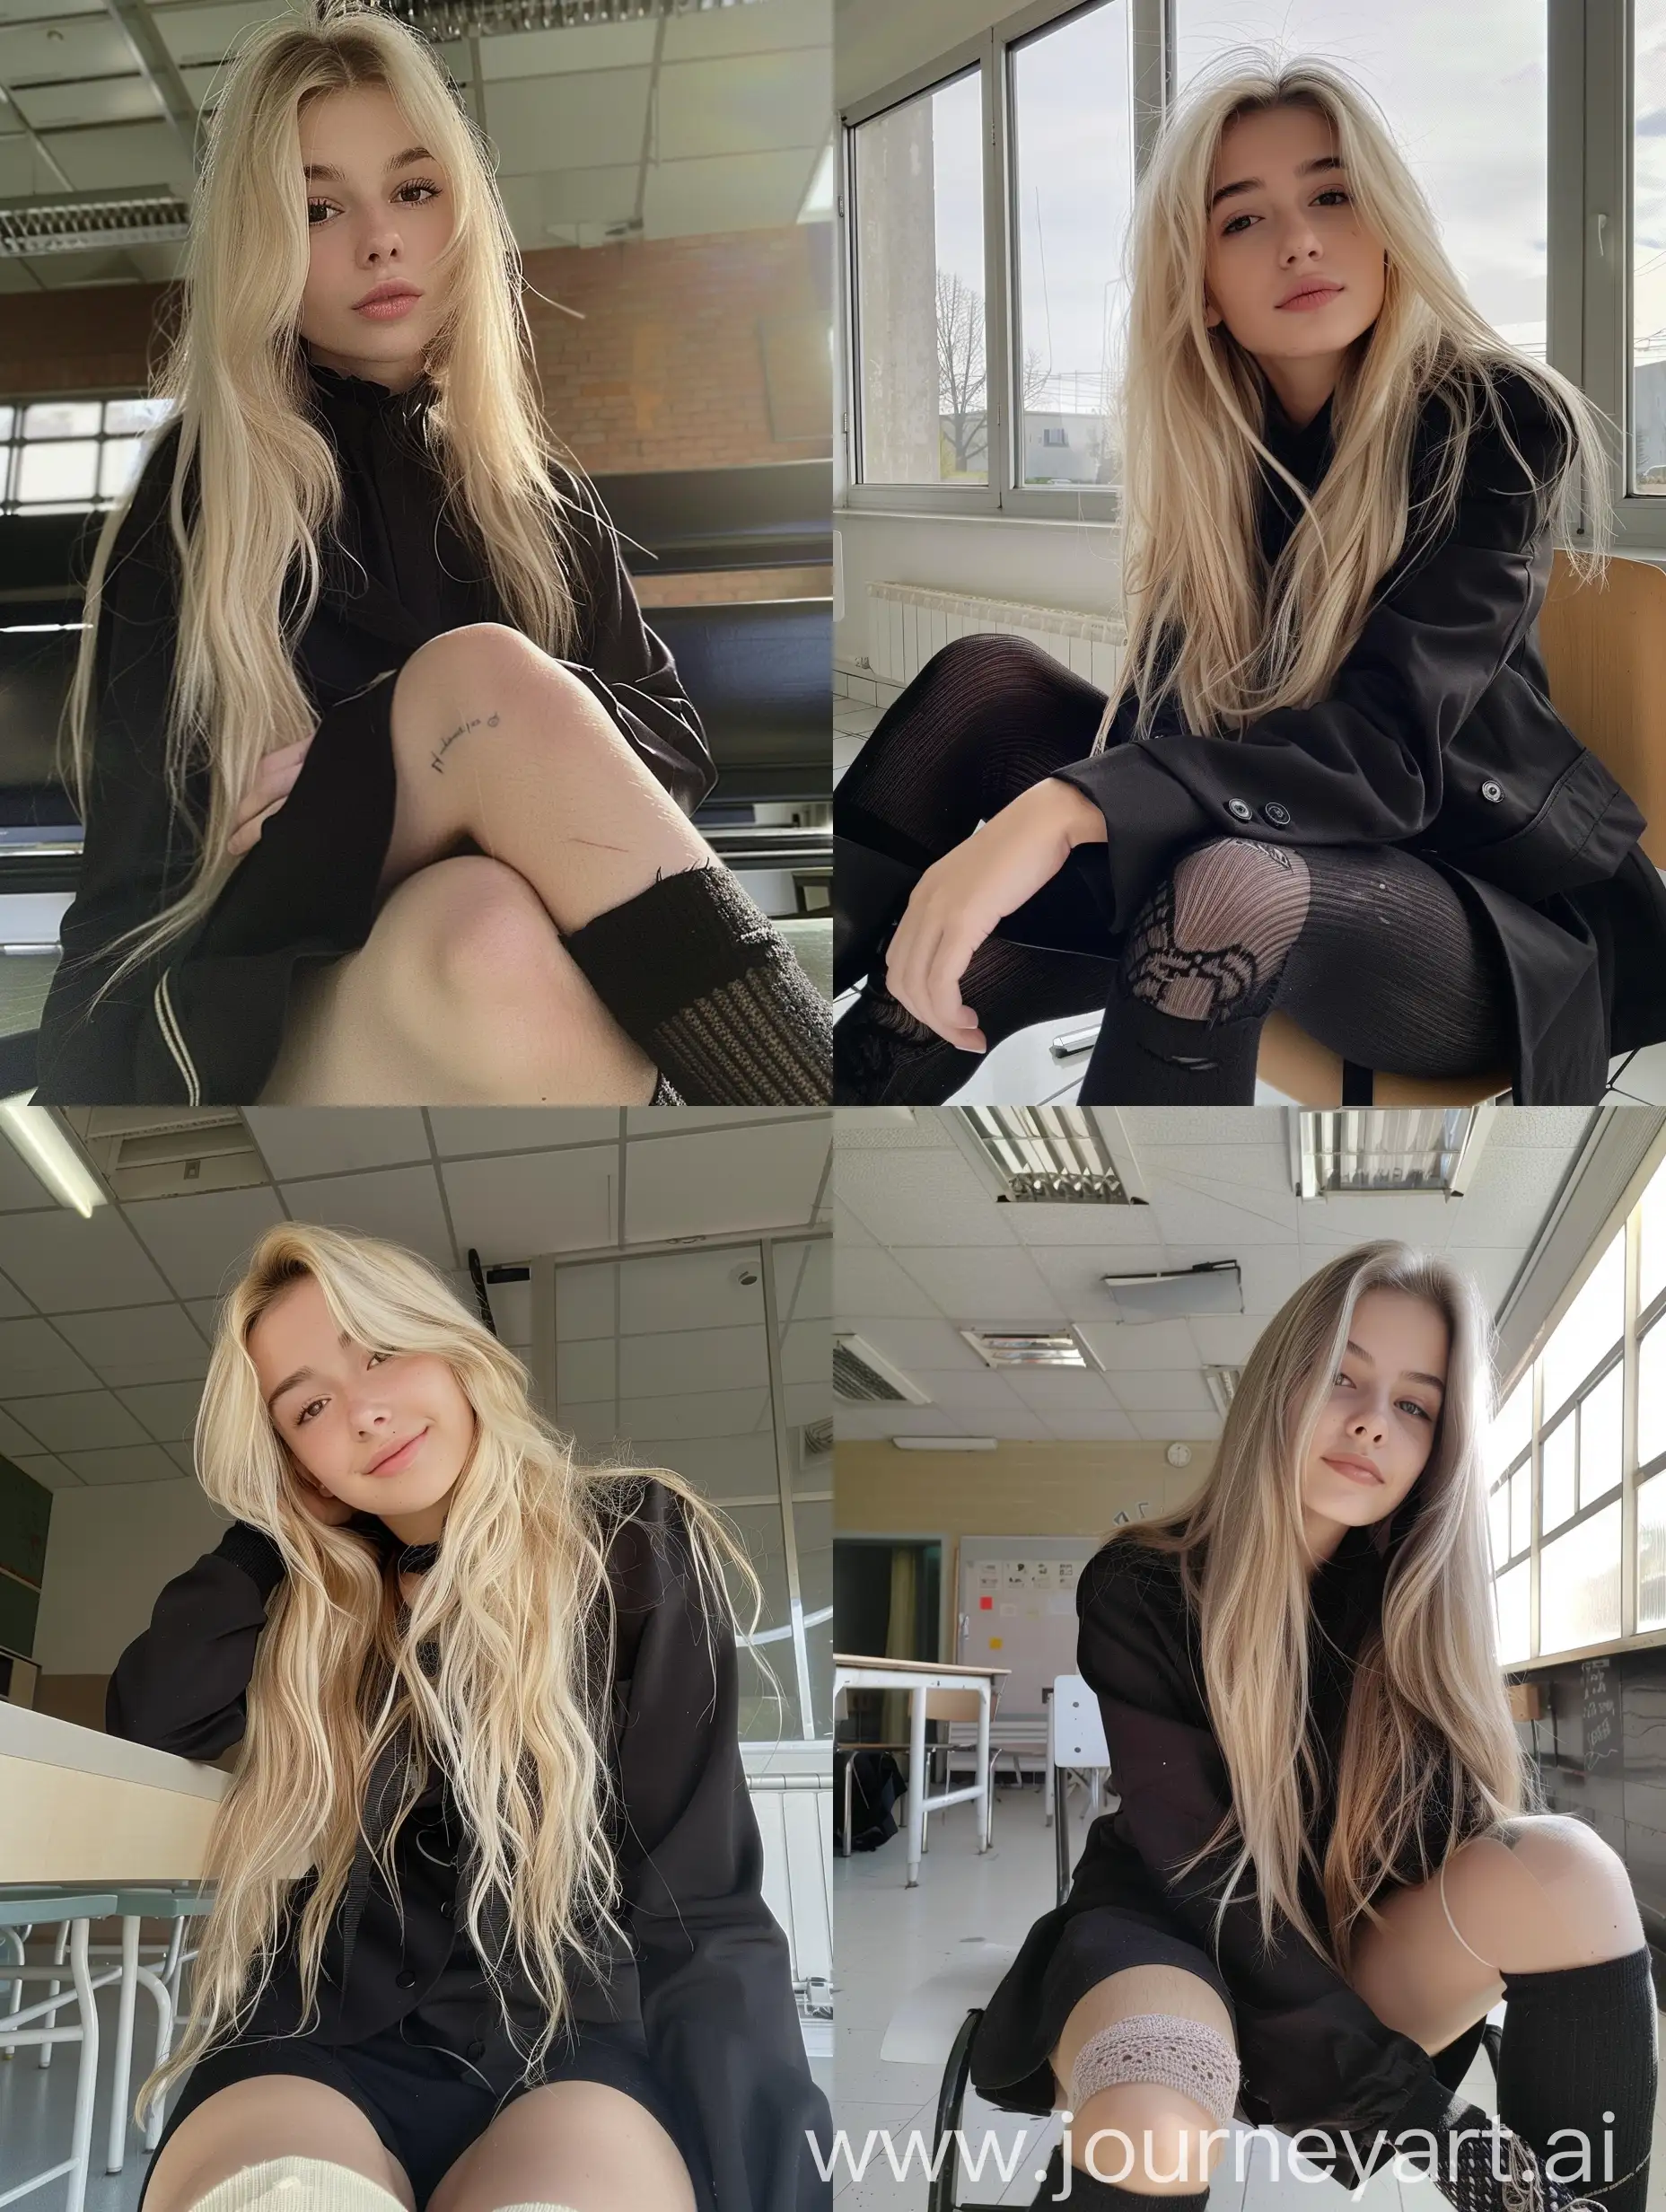 1  girl,    long  blond  hair ,   22  years  old,    influencer,    beauty   ,     in  the  school    ,school black  uniform  ,  makeup,   smiling, chão view,      sitting  on  chair  ,    socks  and  boots,    no  effect,     selfie   , iphone  selfie,      no  filters ,   iphone  photo    natural